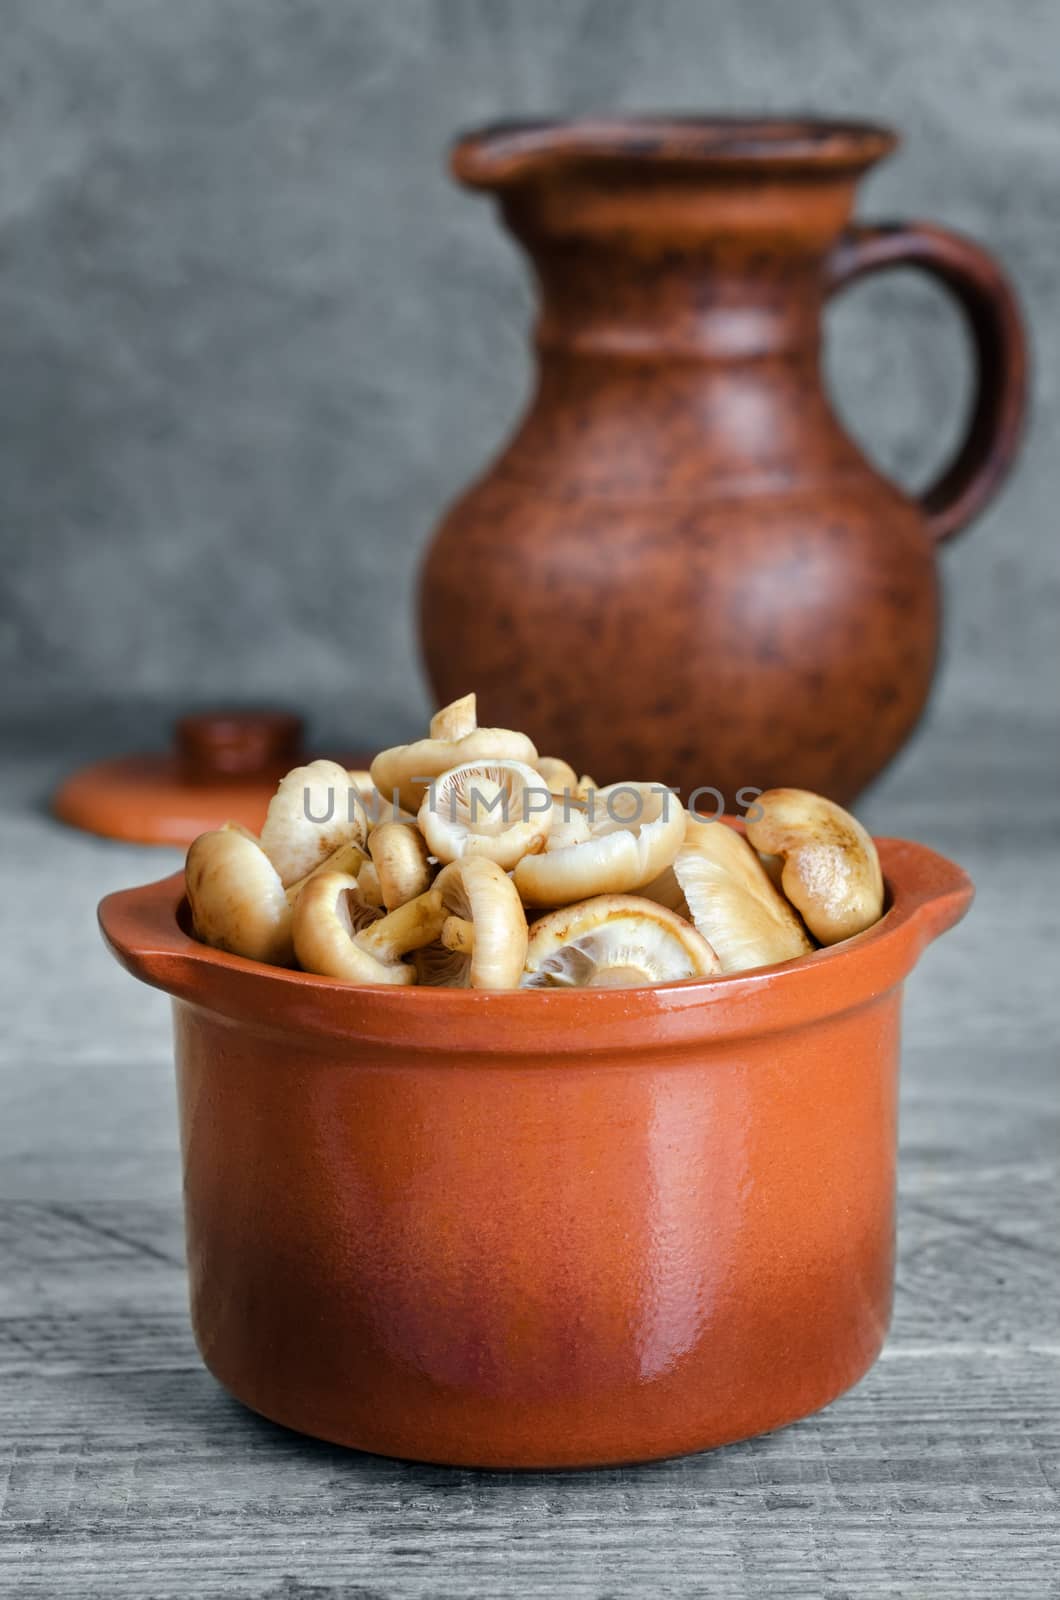 Raw washed mushrooms in a ceramic pot and a jug, on a gray background. Selective focus.